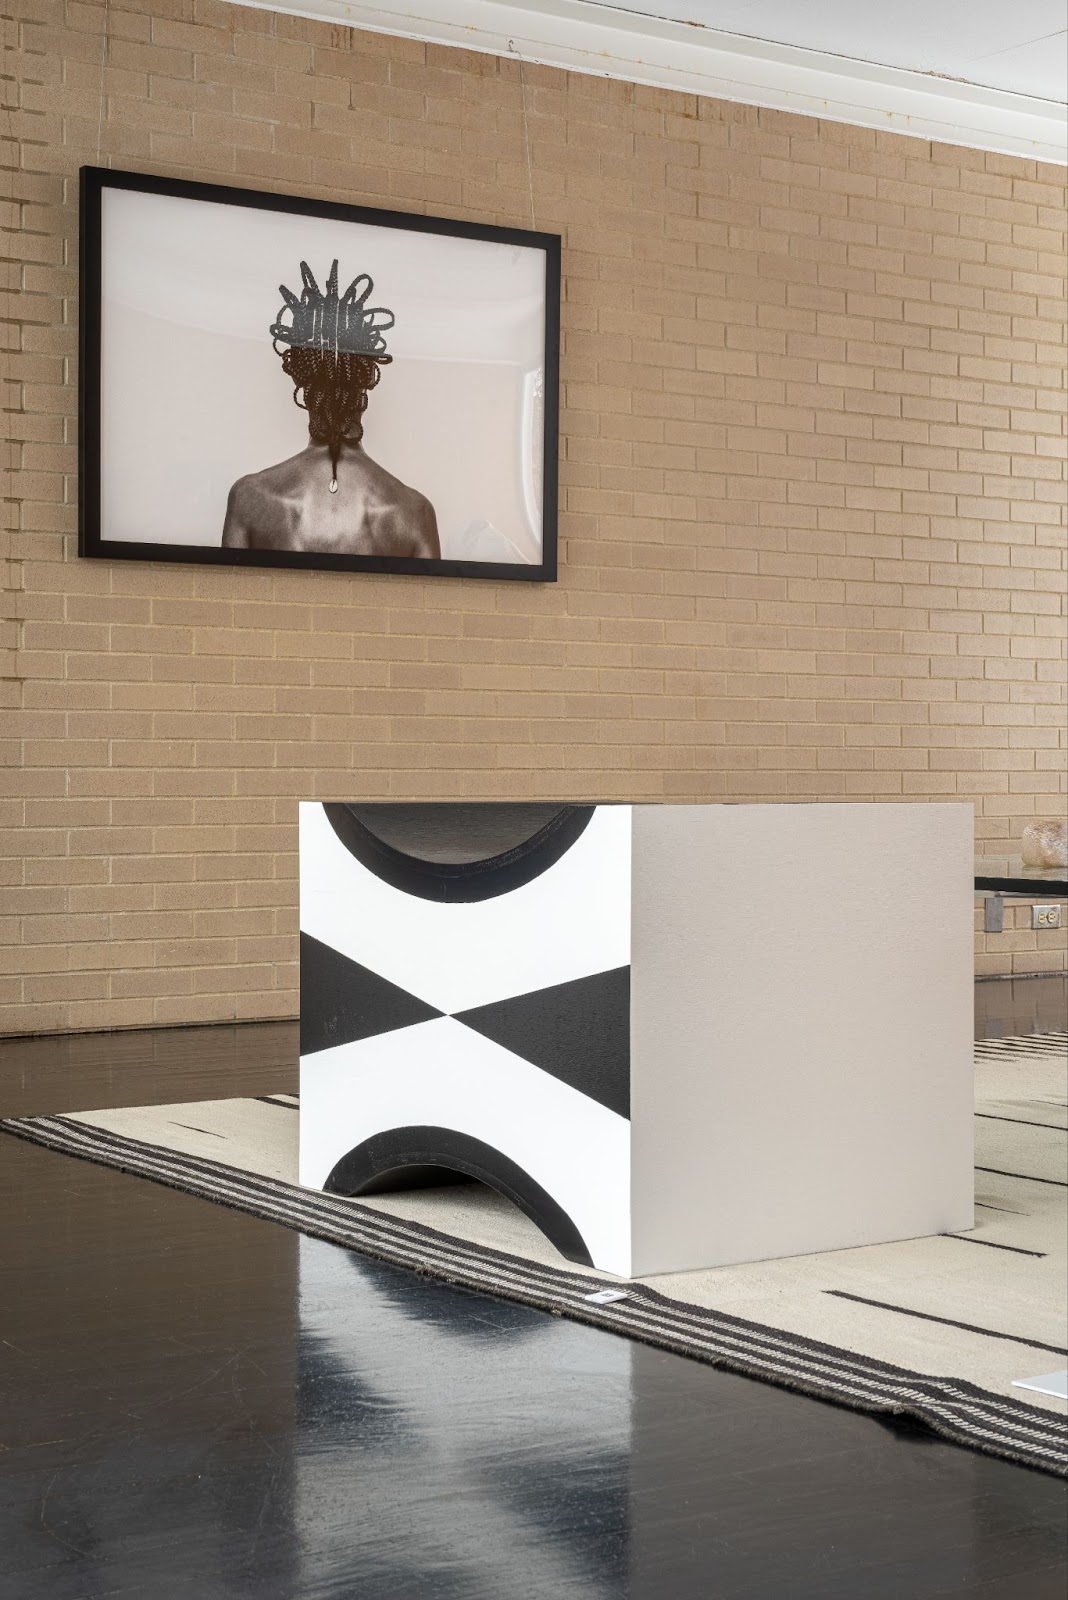 Image: Installation view of A Love Supreme: McCormick House Reimagined. A black and white cube sits on the floor of the gallery. A photograph by Shani Crowe of the back of a dark-skinned model with intricately braided hair hangs on the wall. Photo by Siegfried Mueller, courtesy of the McCormick House. 